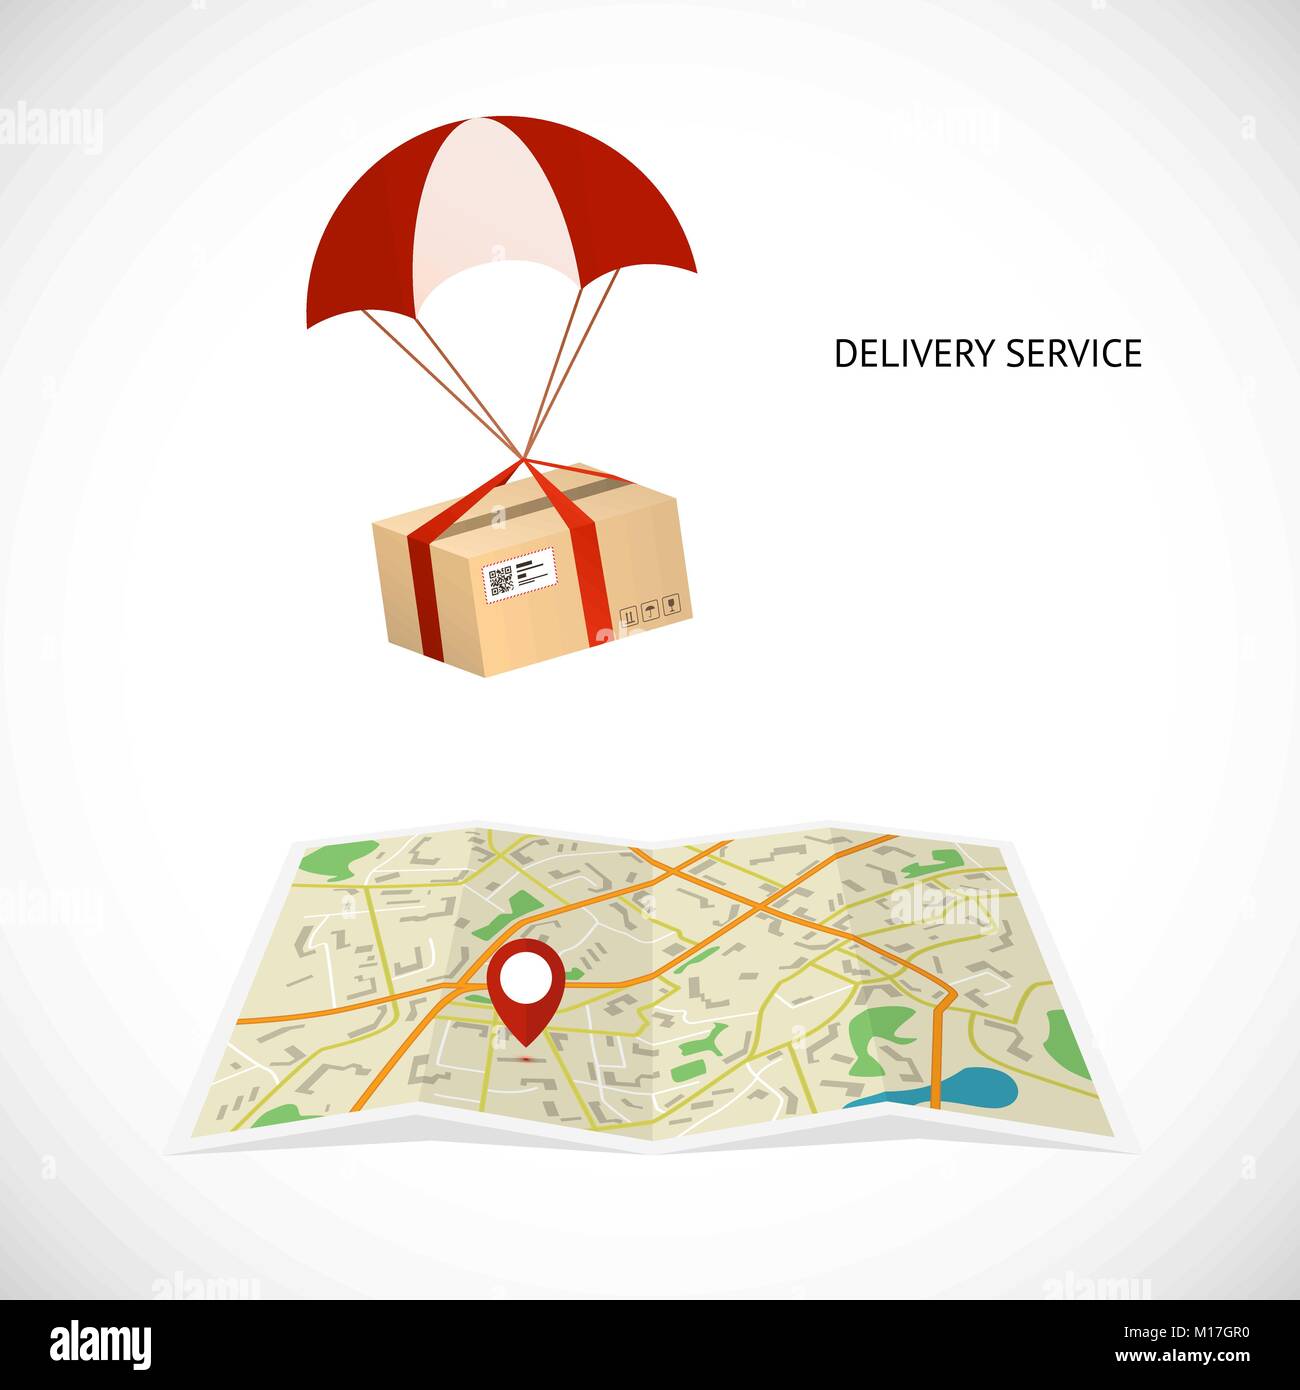 Delivery service. Package flies by parachute to the destination indicated by a pointer on the map. Vector illustration Stock Vector